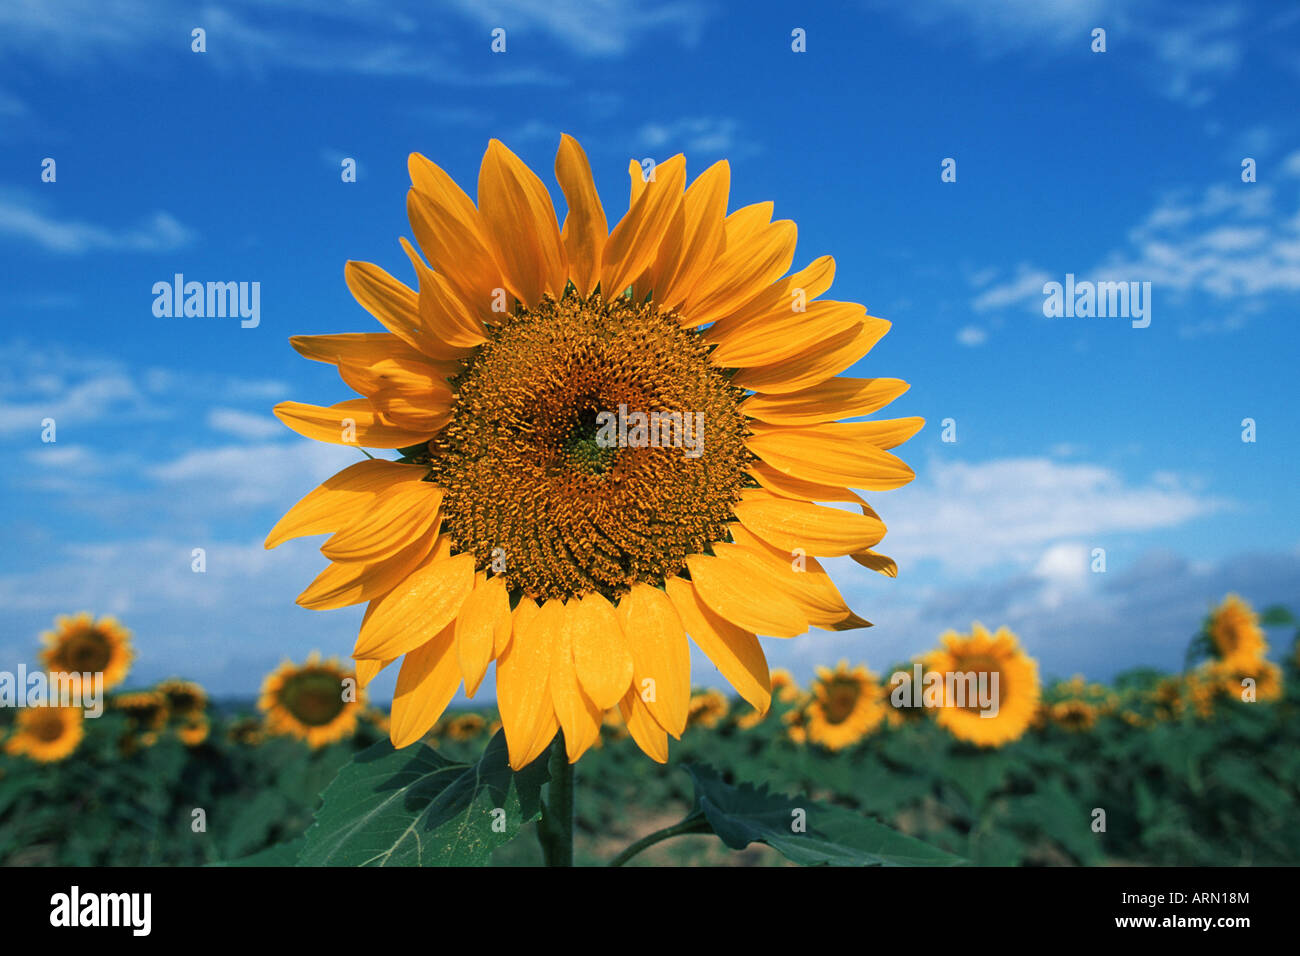 Sunflower seed head rises over the rests, British Columbia, Canada. Stock Photo